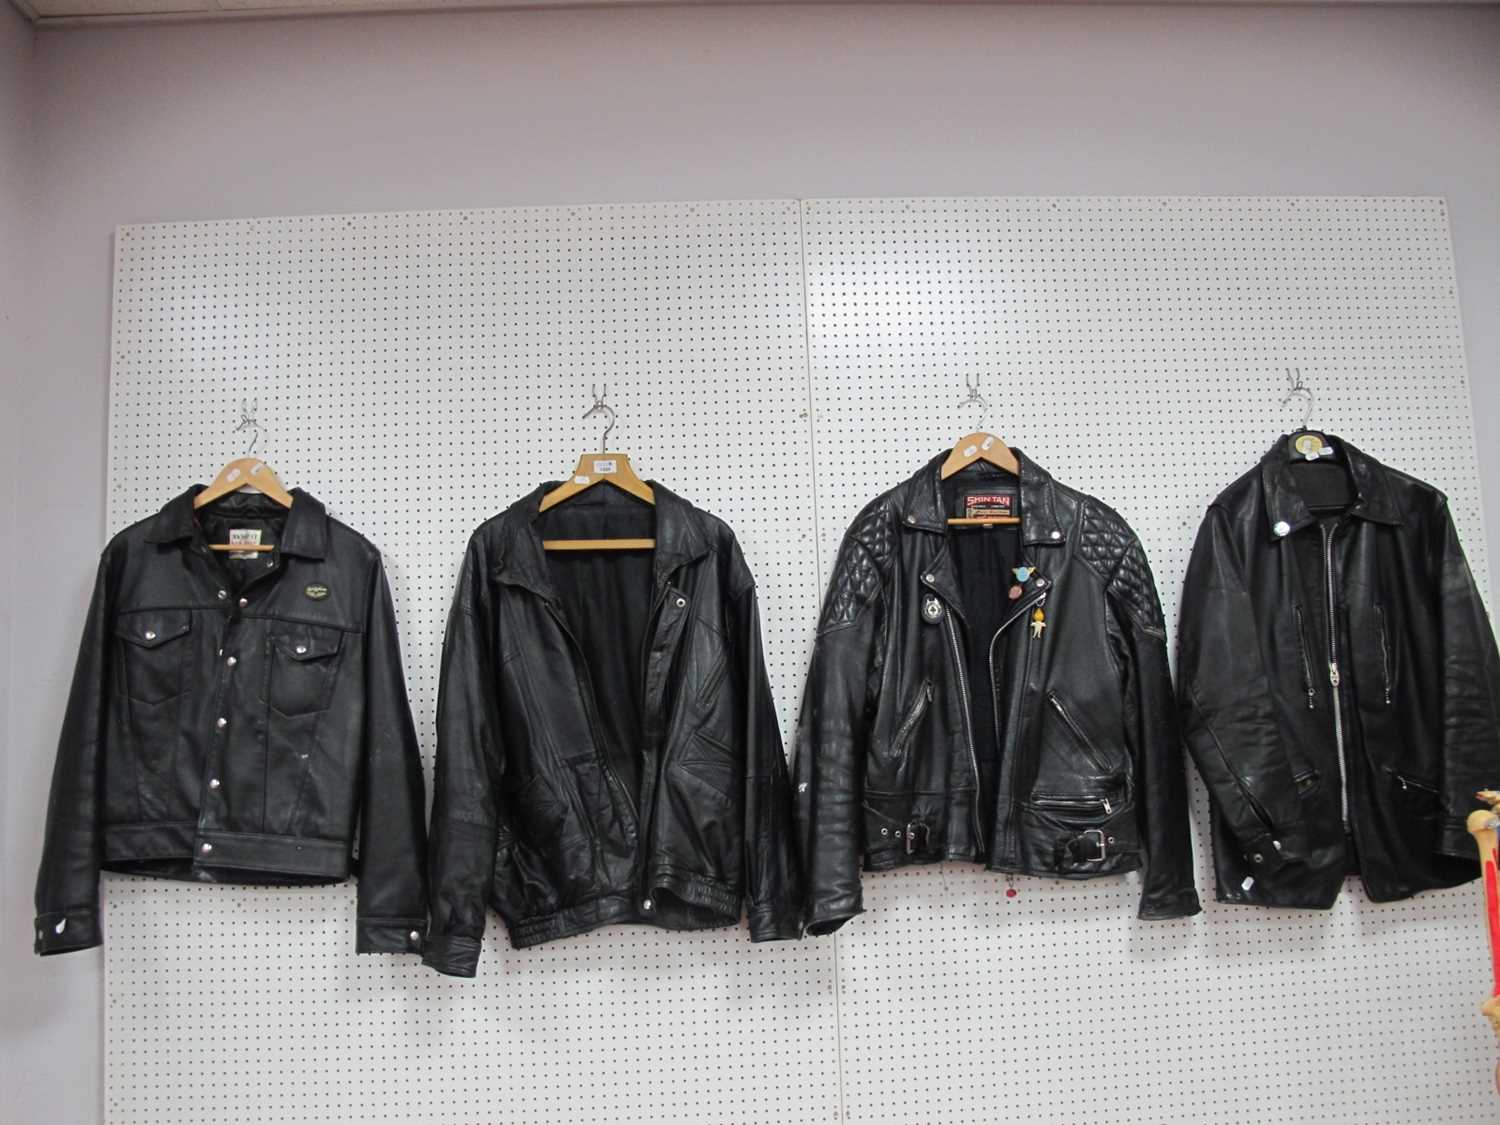 Leather Jackets, skin tan, Aviakit, etc (4). One marked size 40, others without labels, jacket